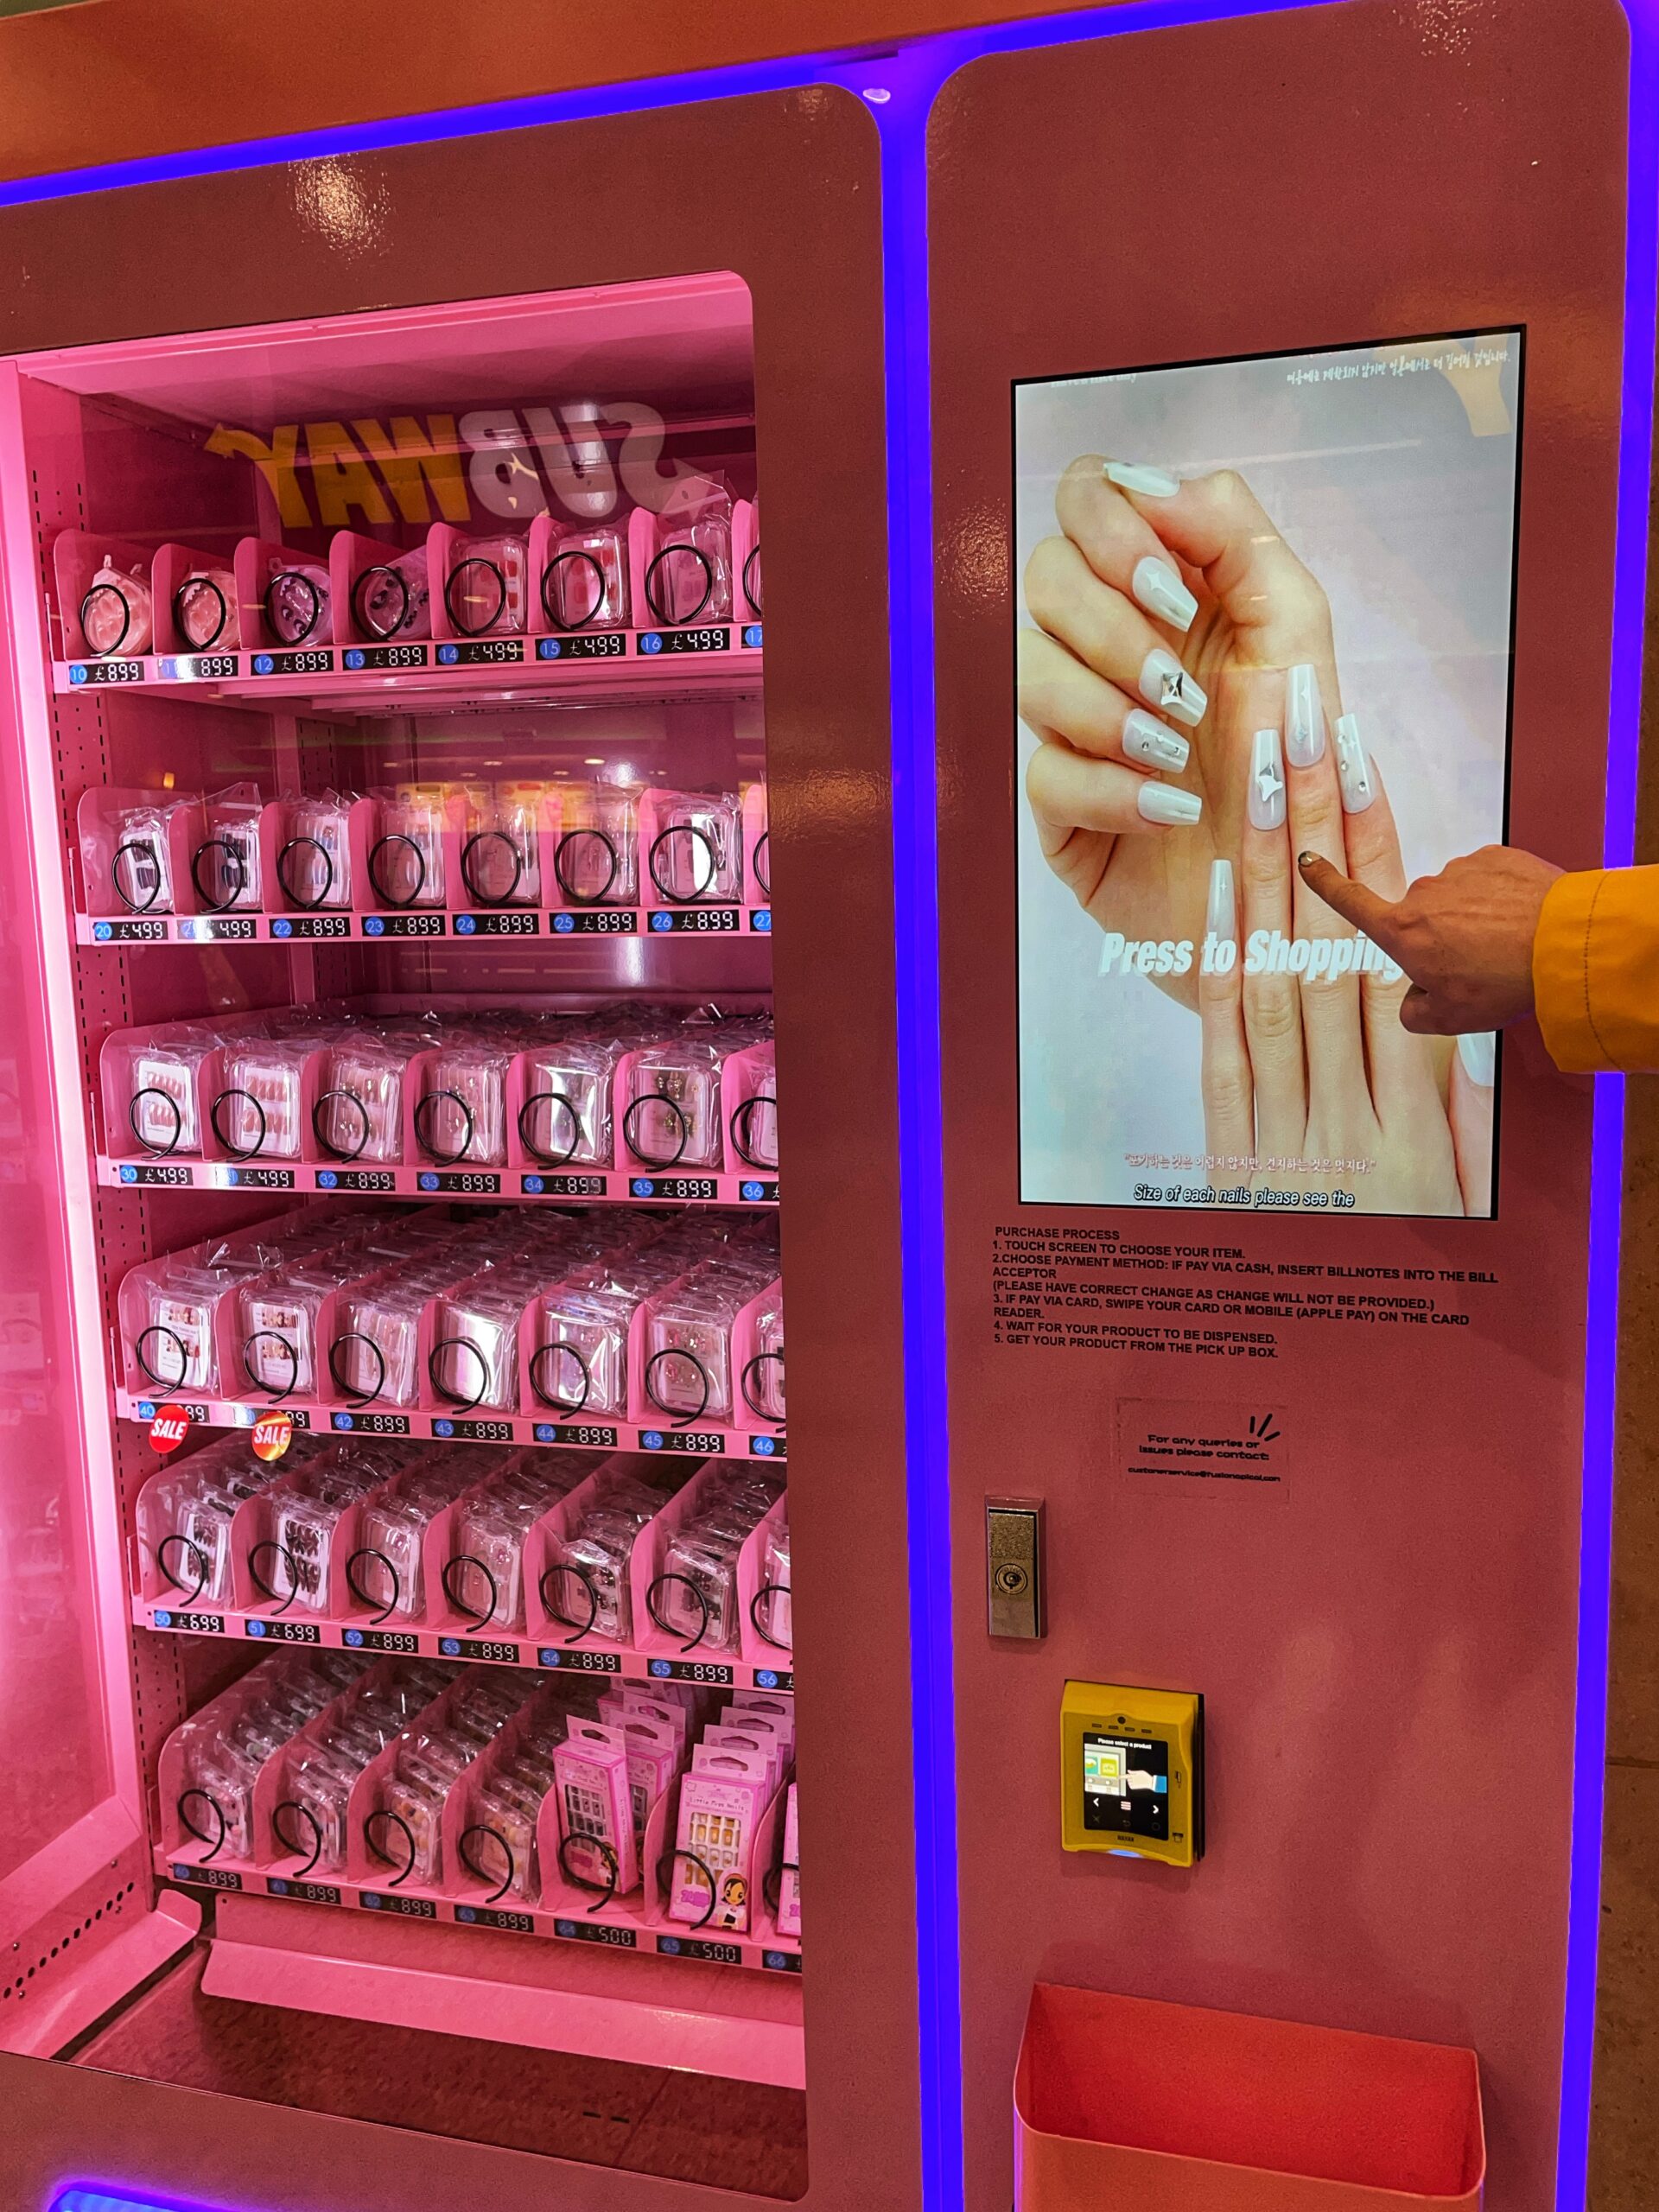 And a false nails vending machine next to it